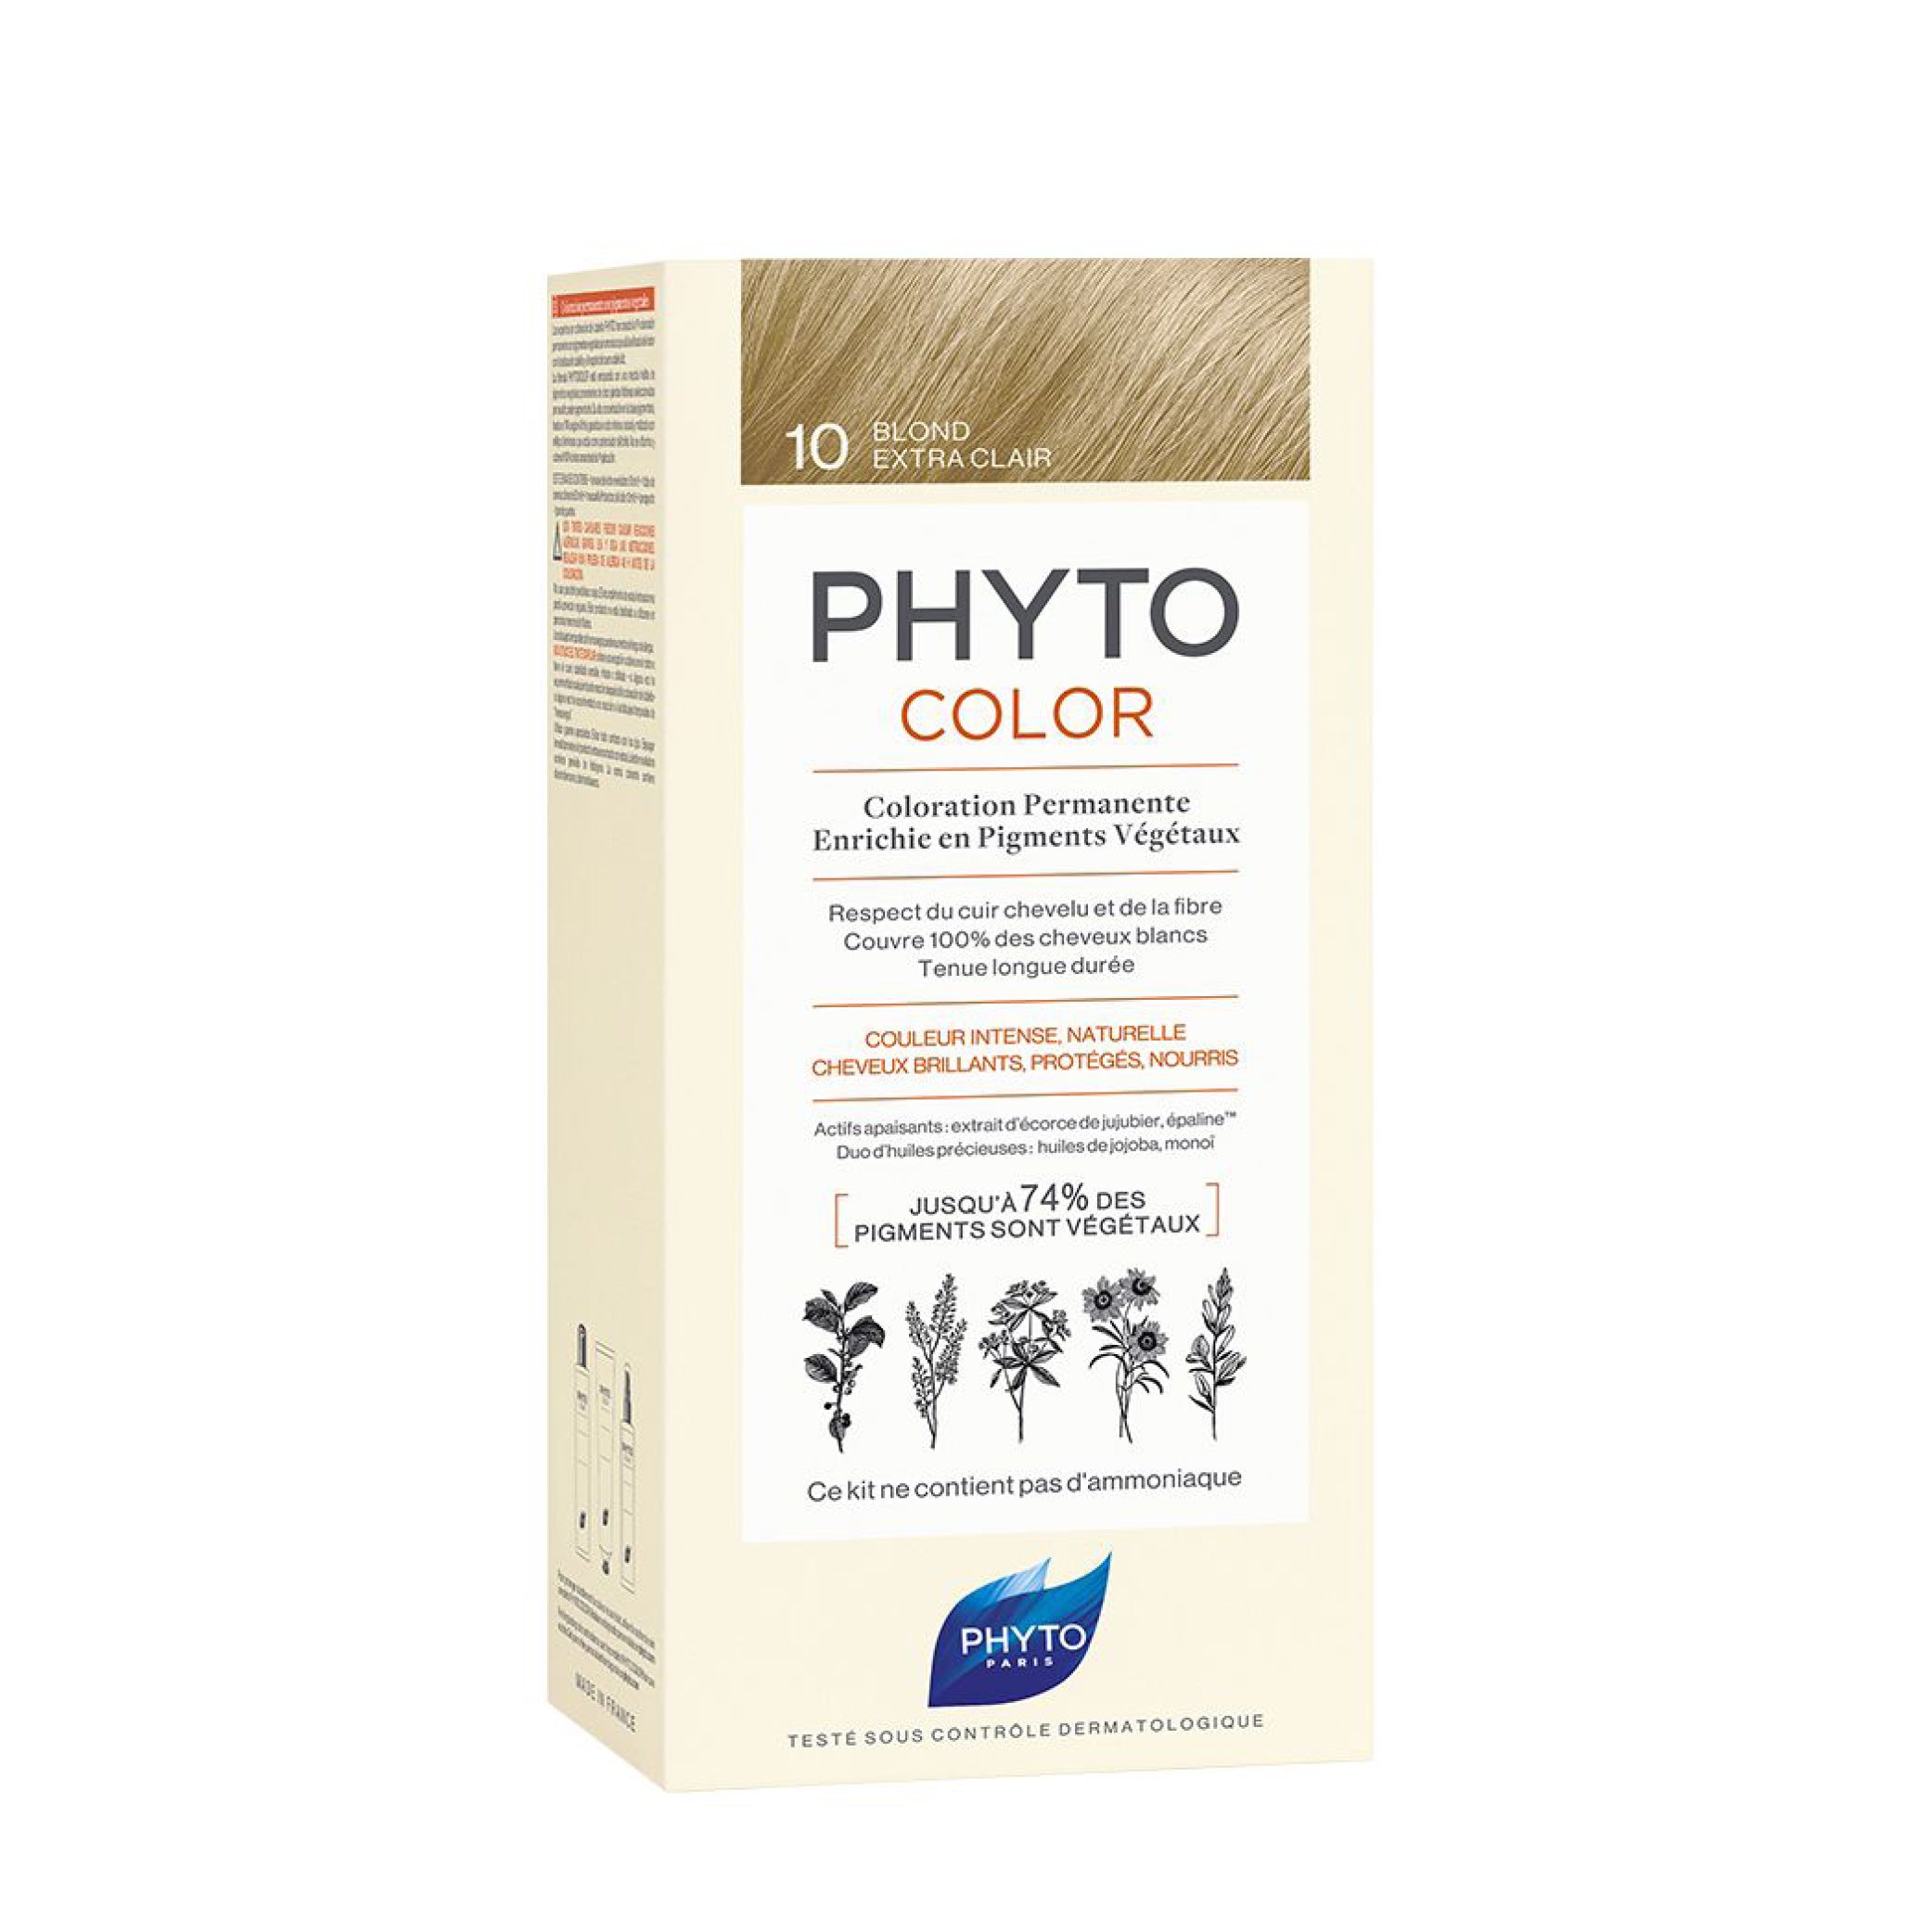 PHYTOCOLOR 10 Blond extra clair